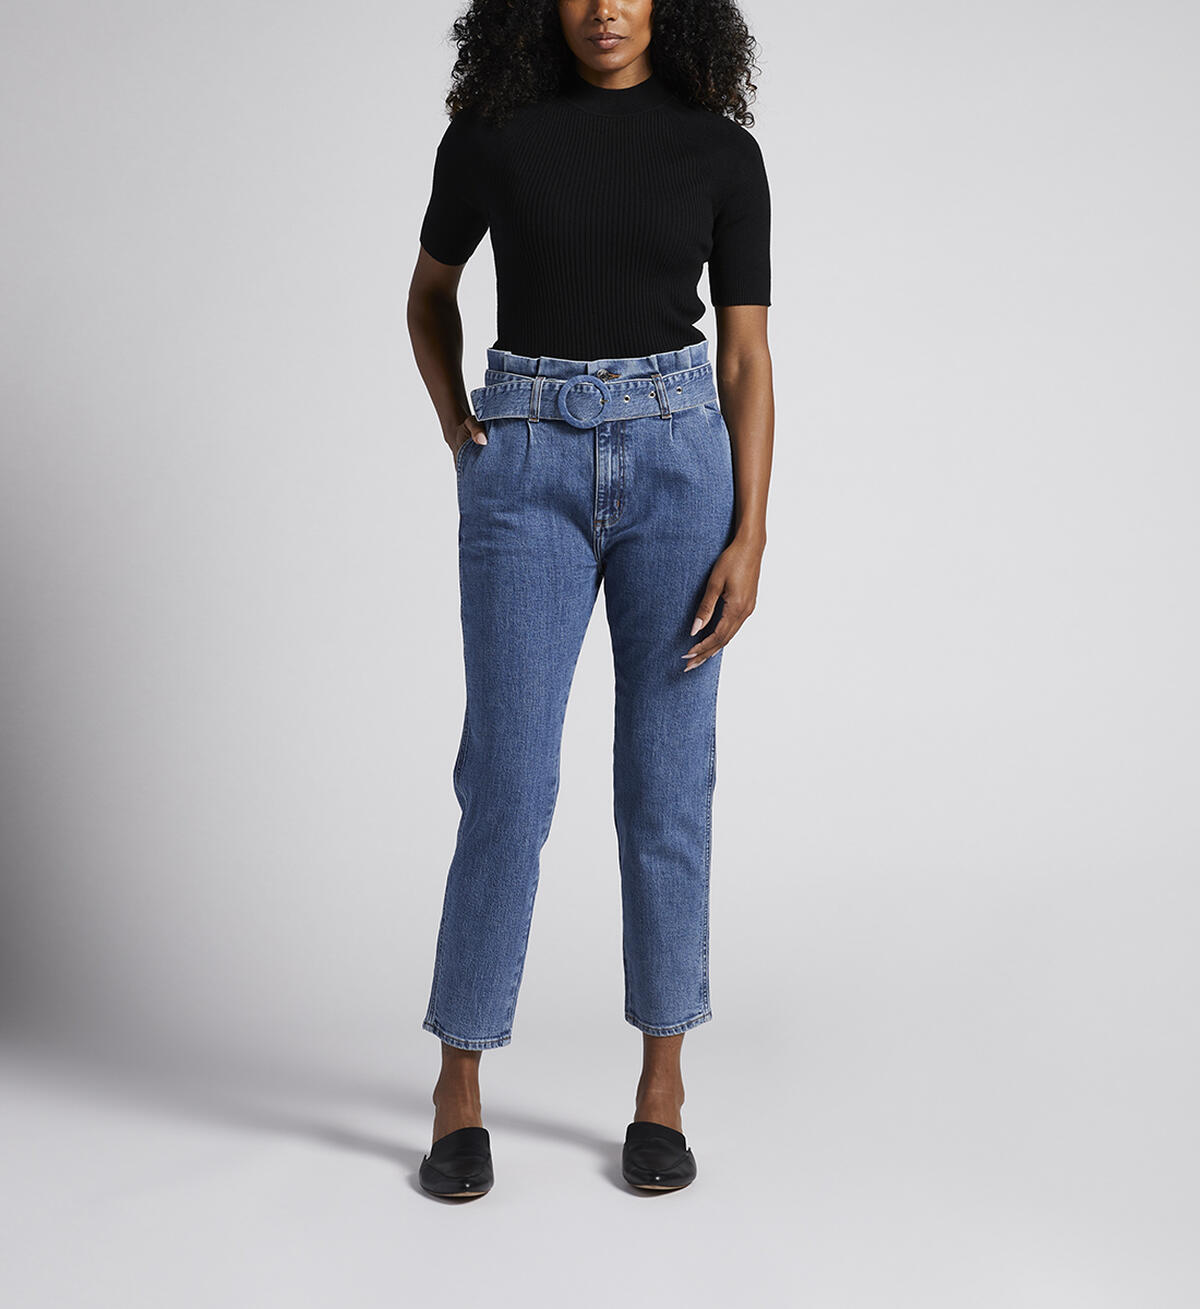 Belted Pleat High Rise Tapered Leg Pant, , hi-res image number 0